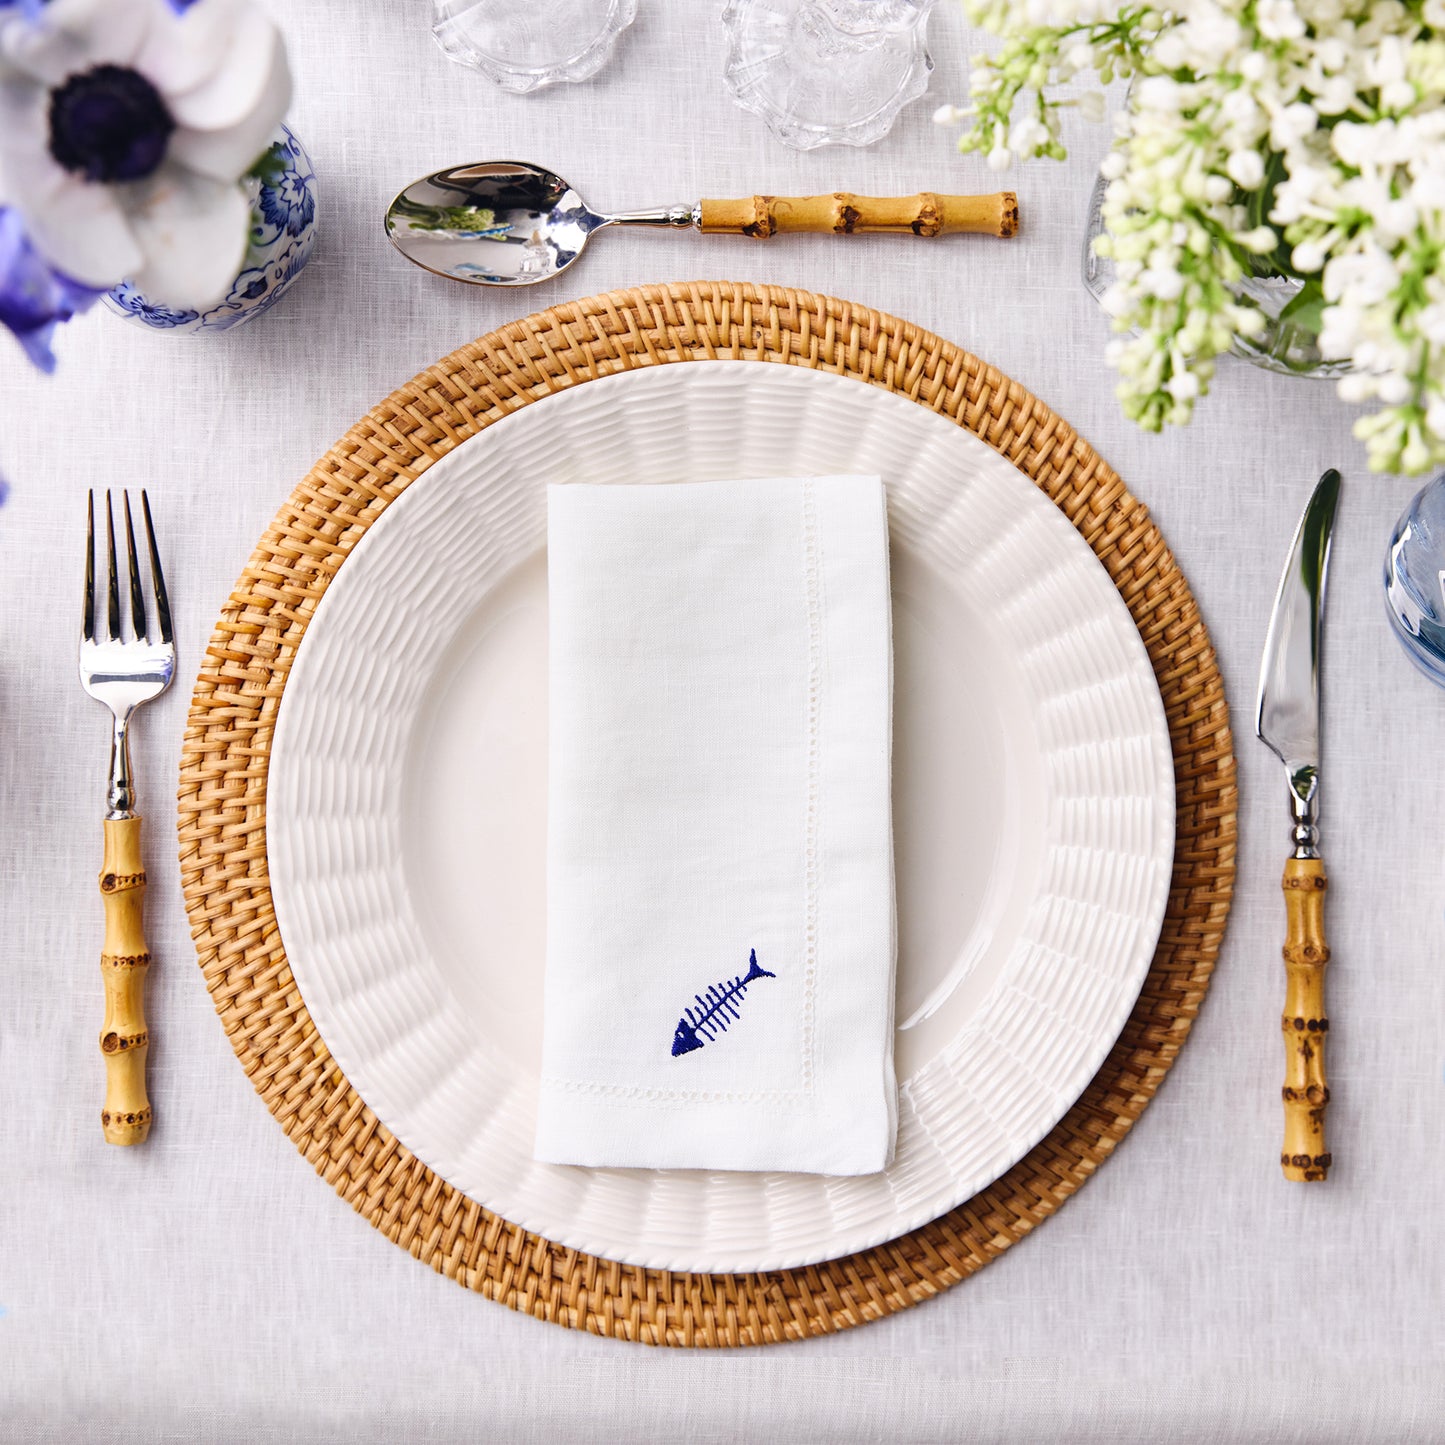 Set of 4 - Pure Linen Hemstitch Napkin with Embroidery Detail - White